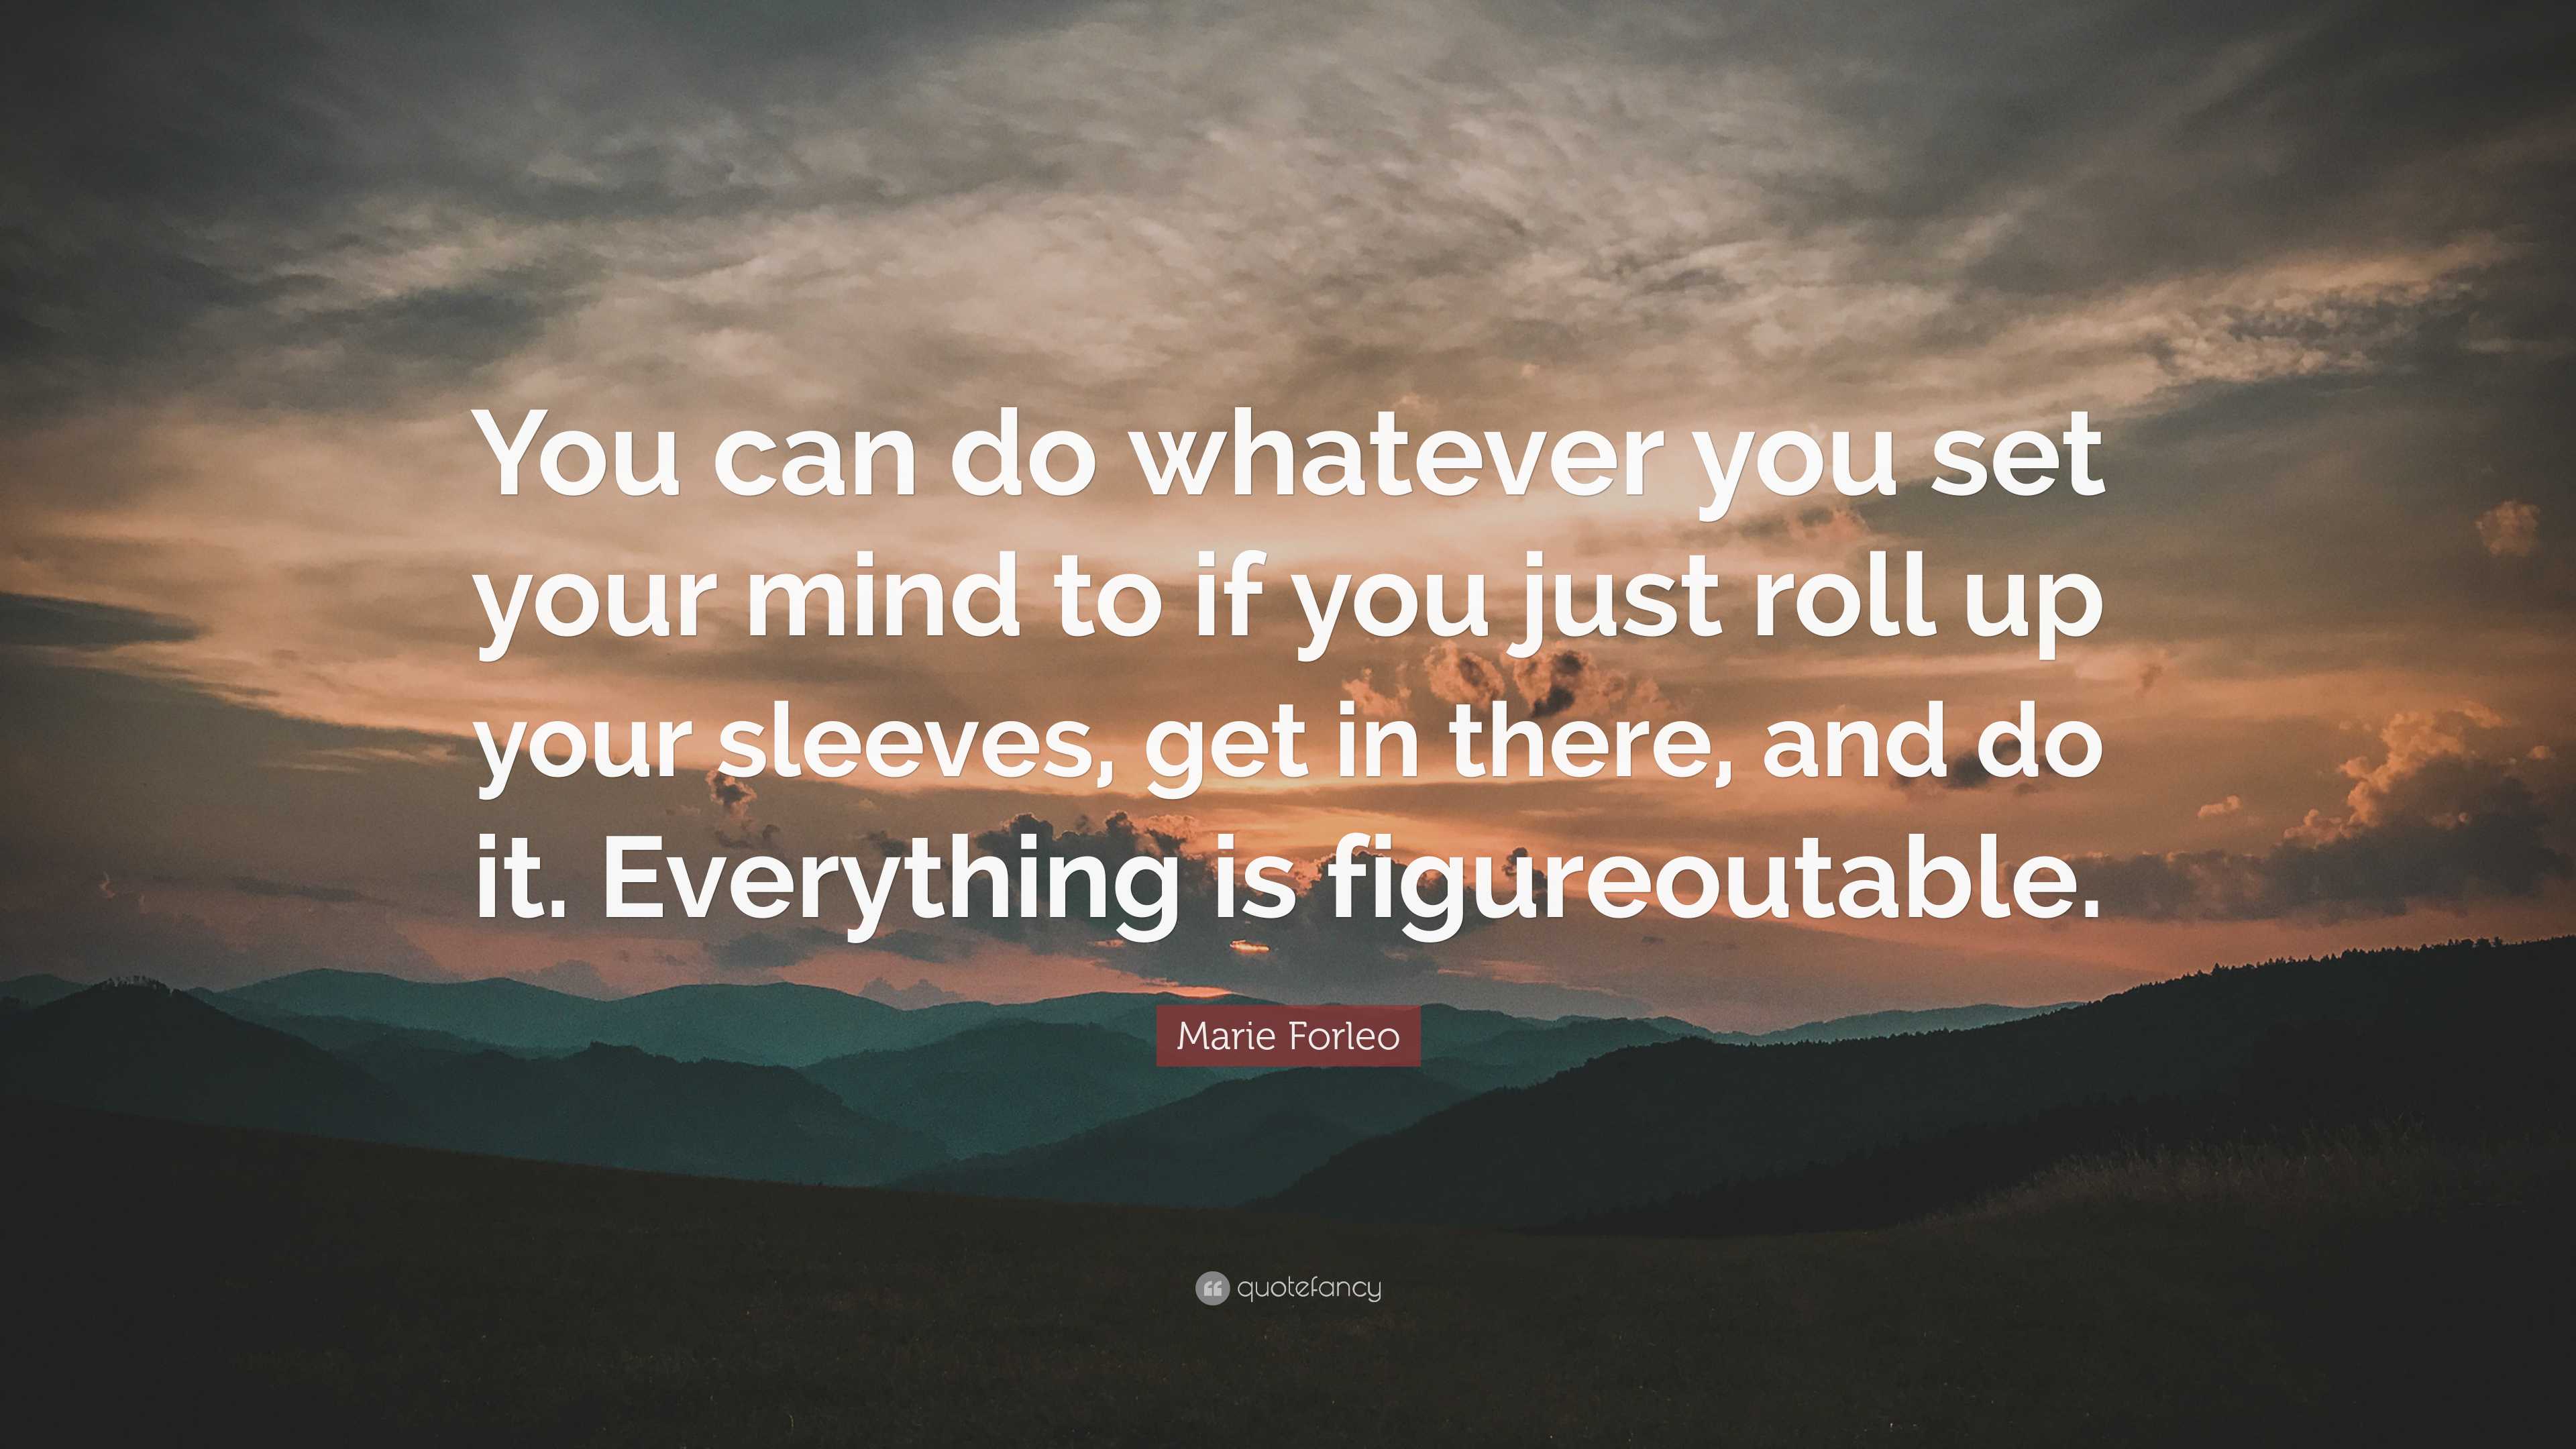 https://quotefancy.com/media/wallpaper/3840x2160/7968874-Marie-Forleo-Quote-You-can-do-whatever-you-set-your-mind-to-if-you.jpg